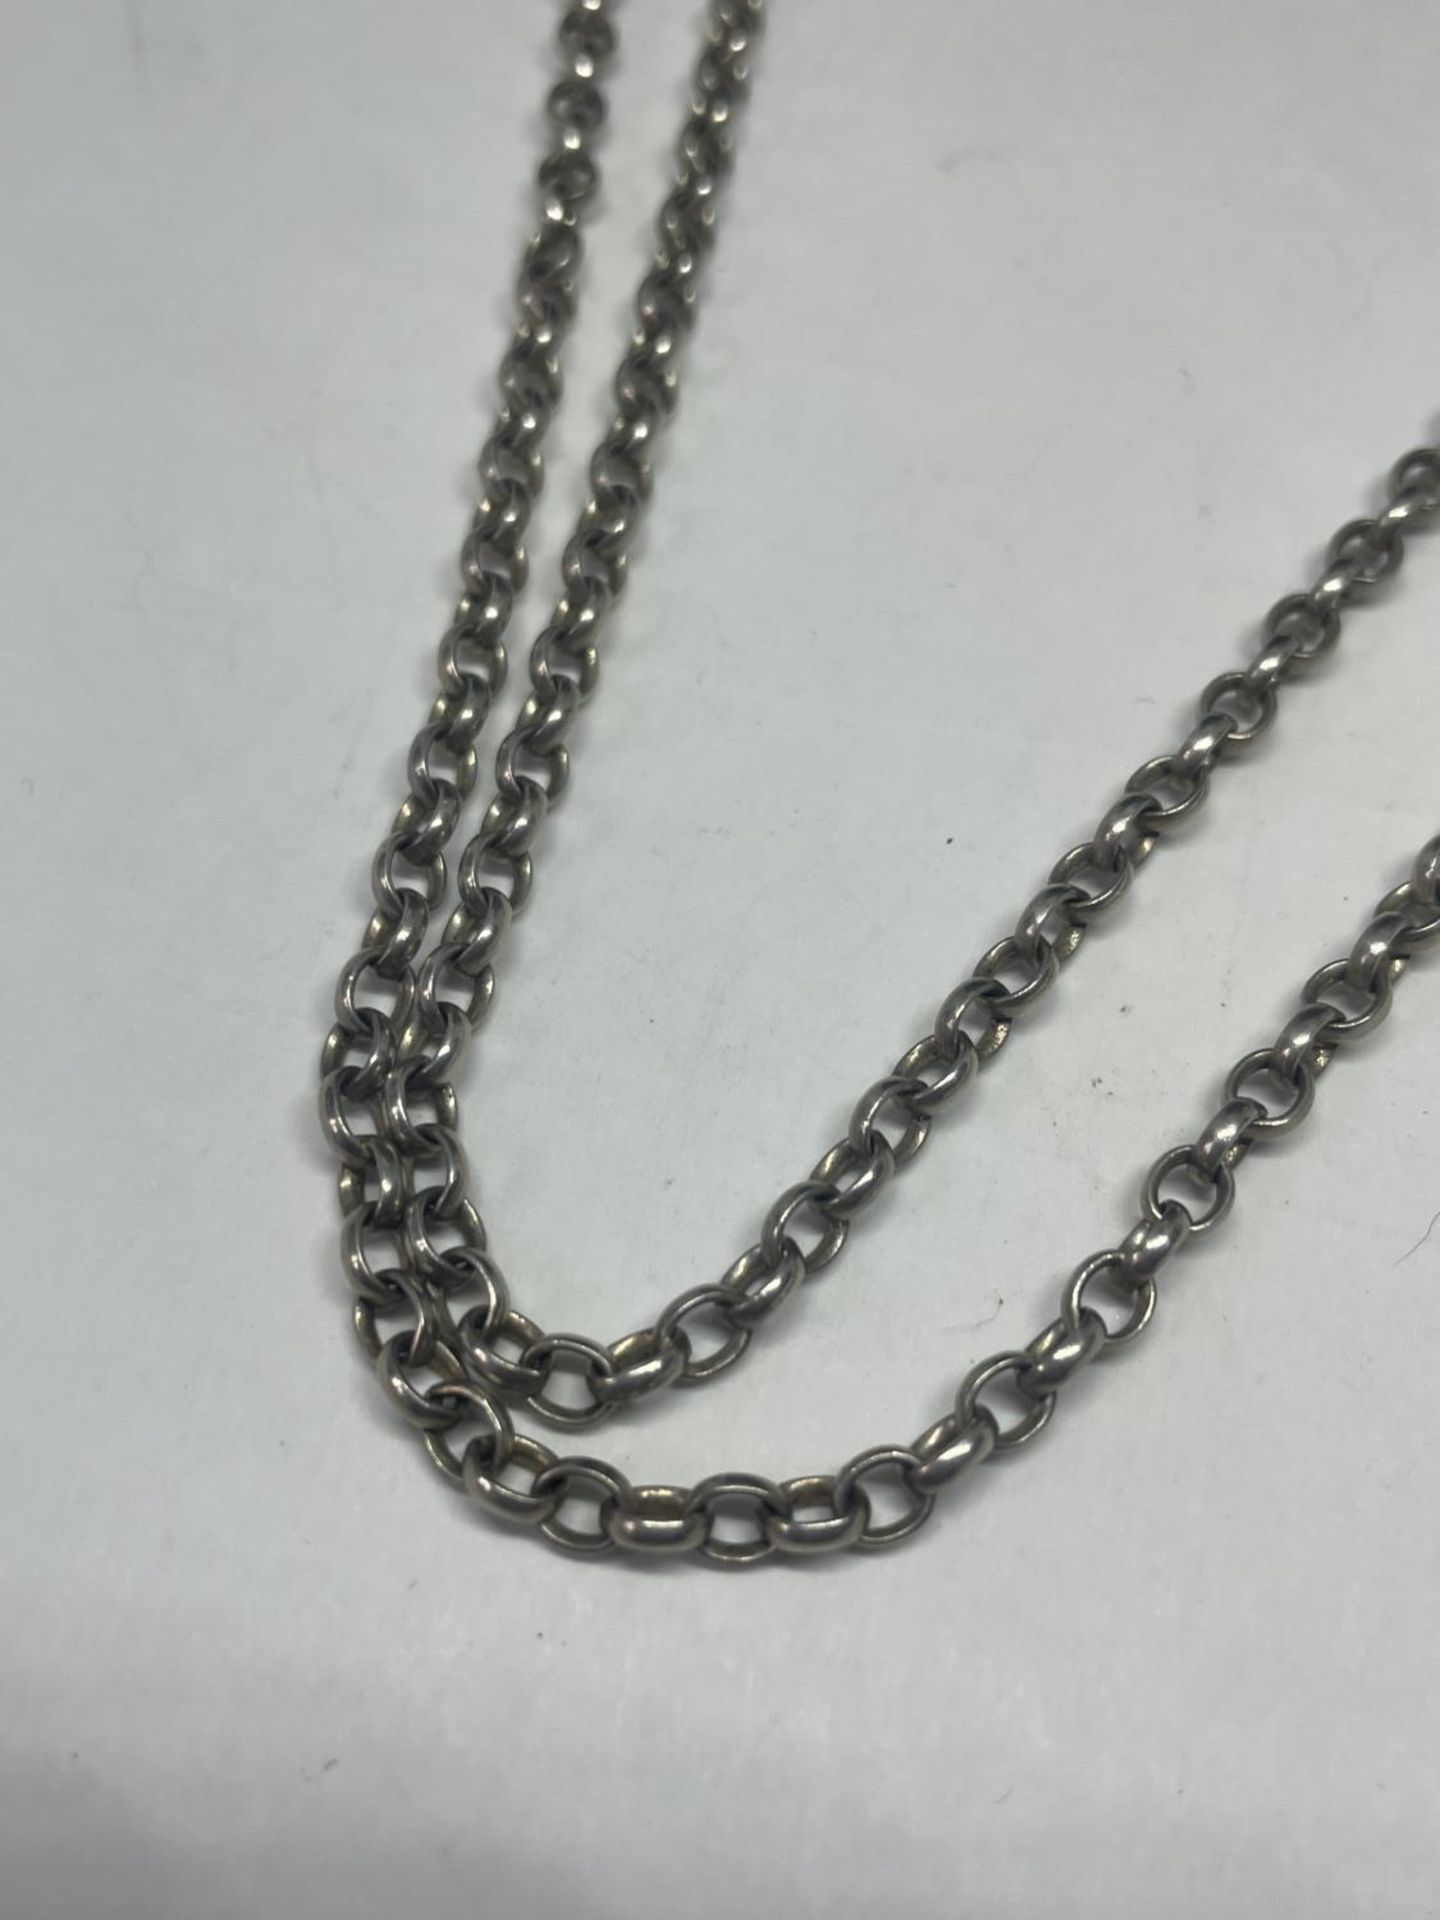 A SILVER BELCHER CHAIN NECKLACE LENGTH 26" - Image 2 of 3